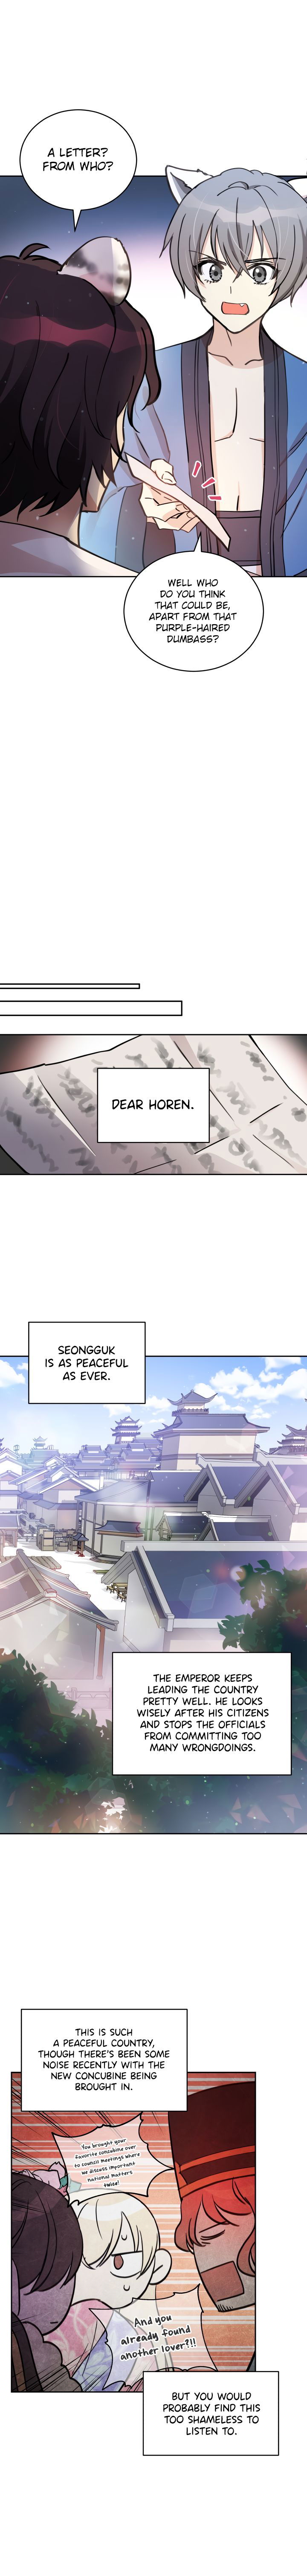 Contract Concubine Chapter 57 page 6